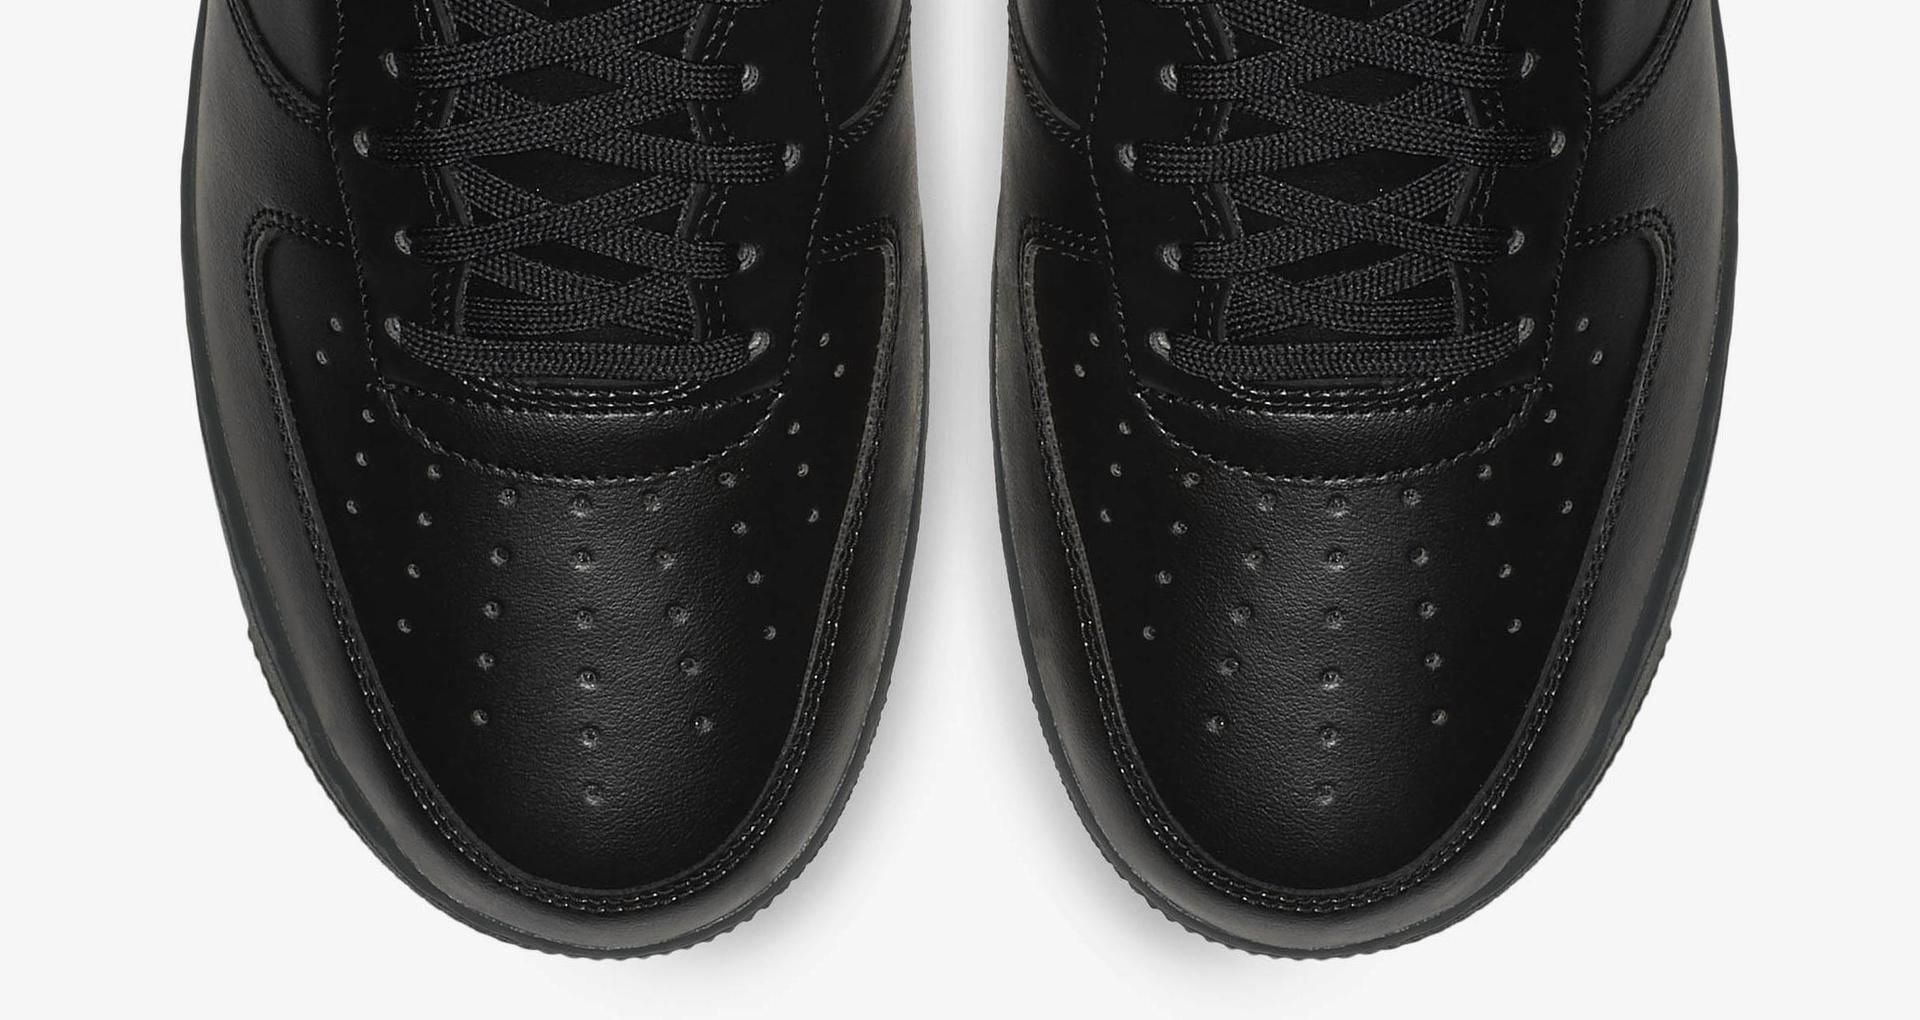 Nike Air Force 1 Flyleather 'Black' Release Date. Nike SNKRS